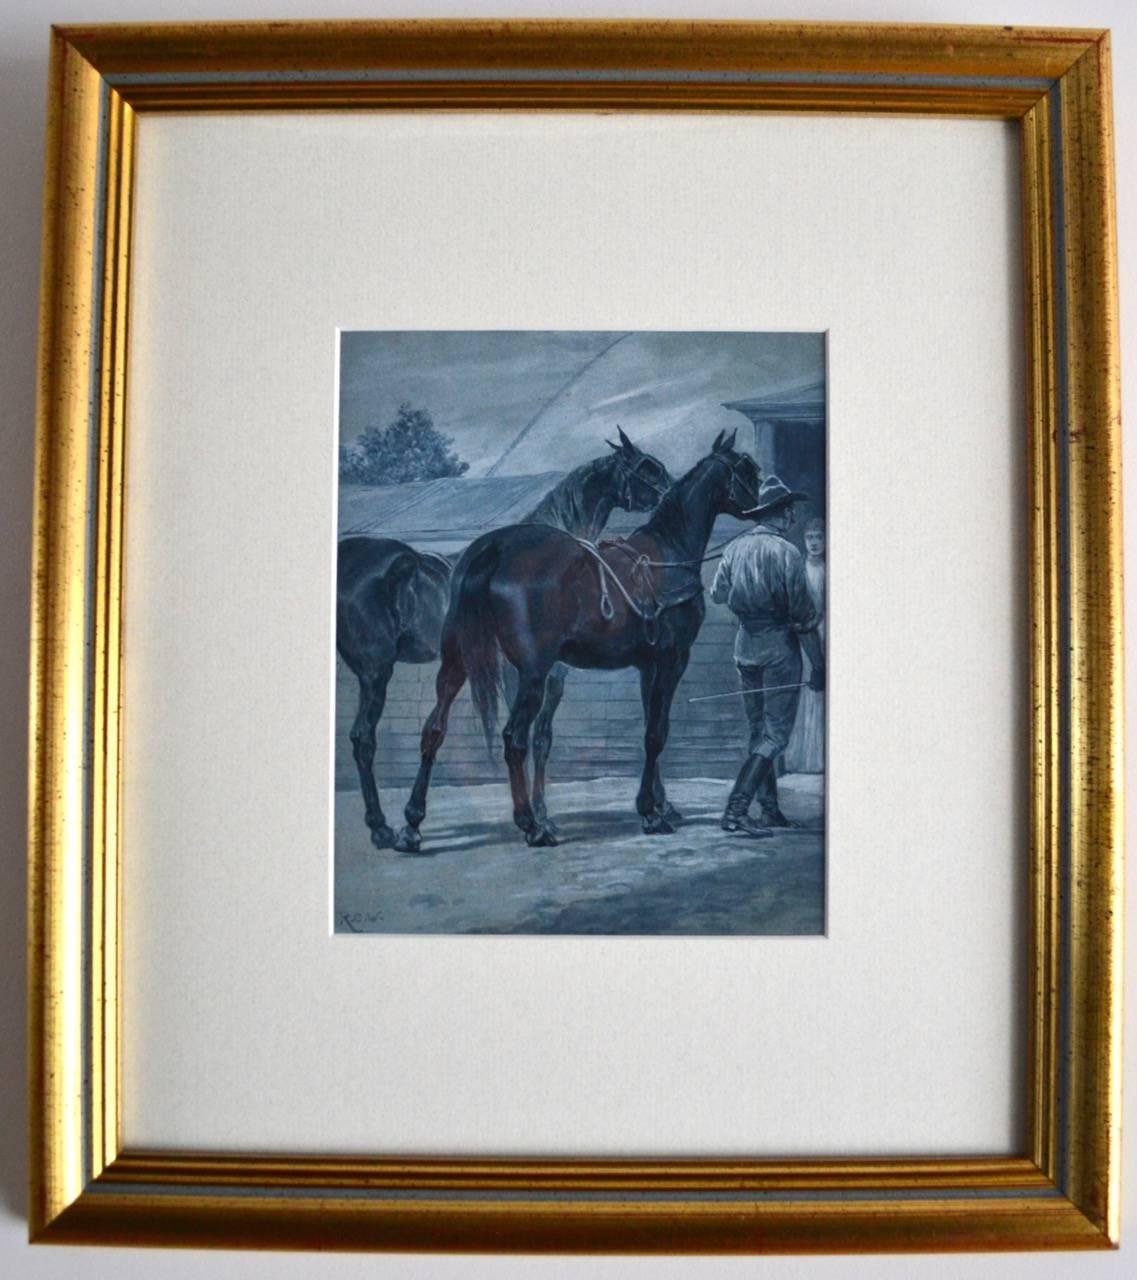 Bring The Horses Home, Watercolor by Richard Caton Woodville Jnr. - Art by Richard Caton Woodville Jr.